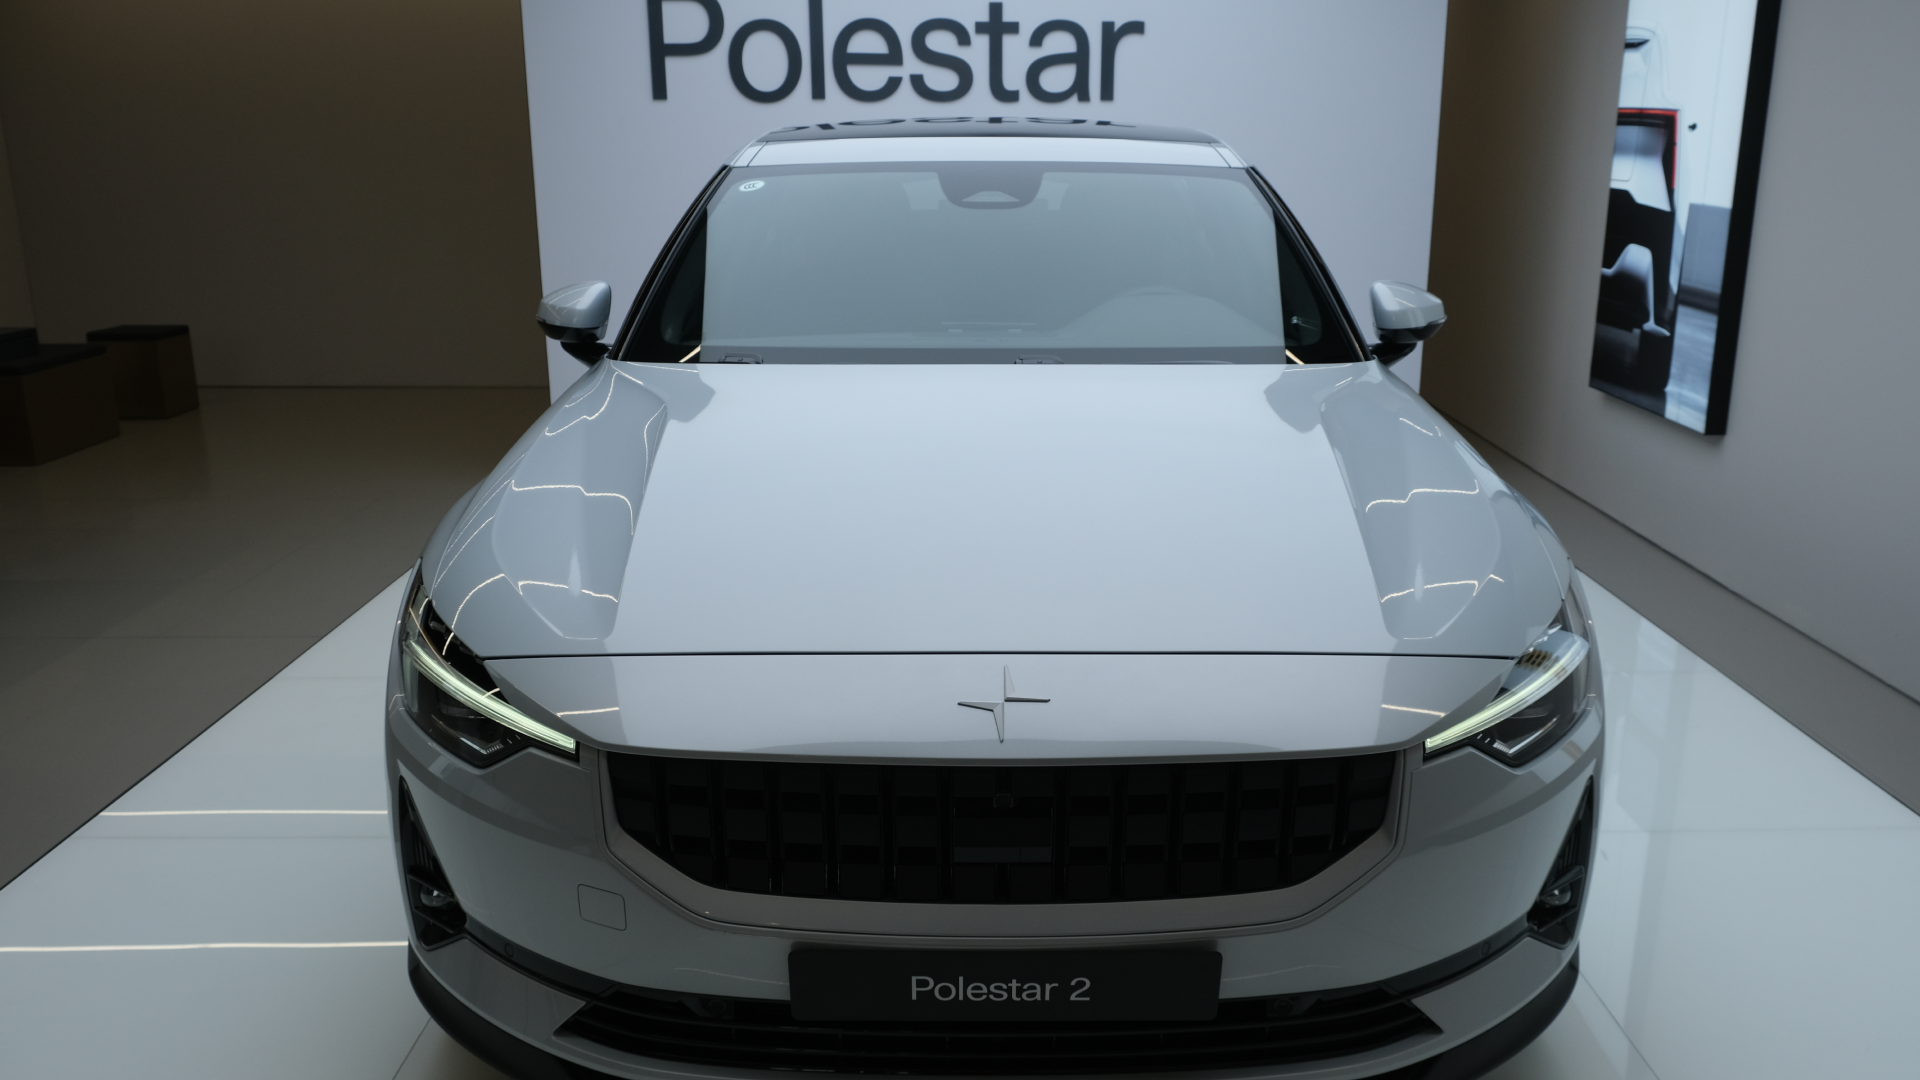 Polestar Sales Exceed Expected Numbers In H1 of 2022.